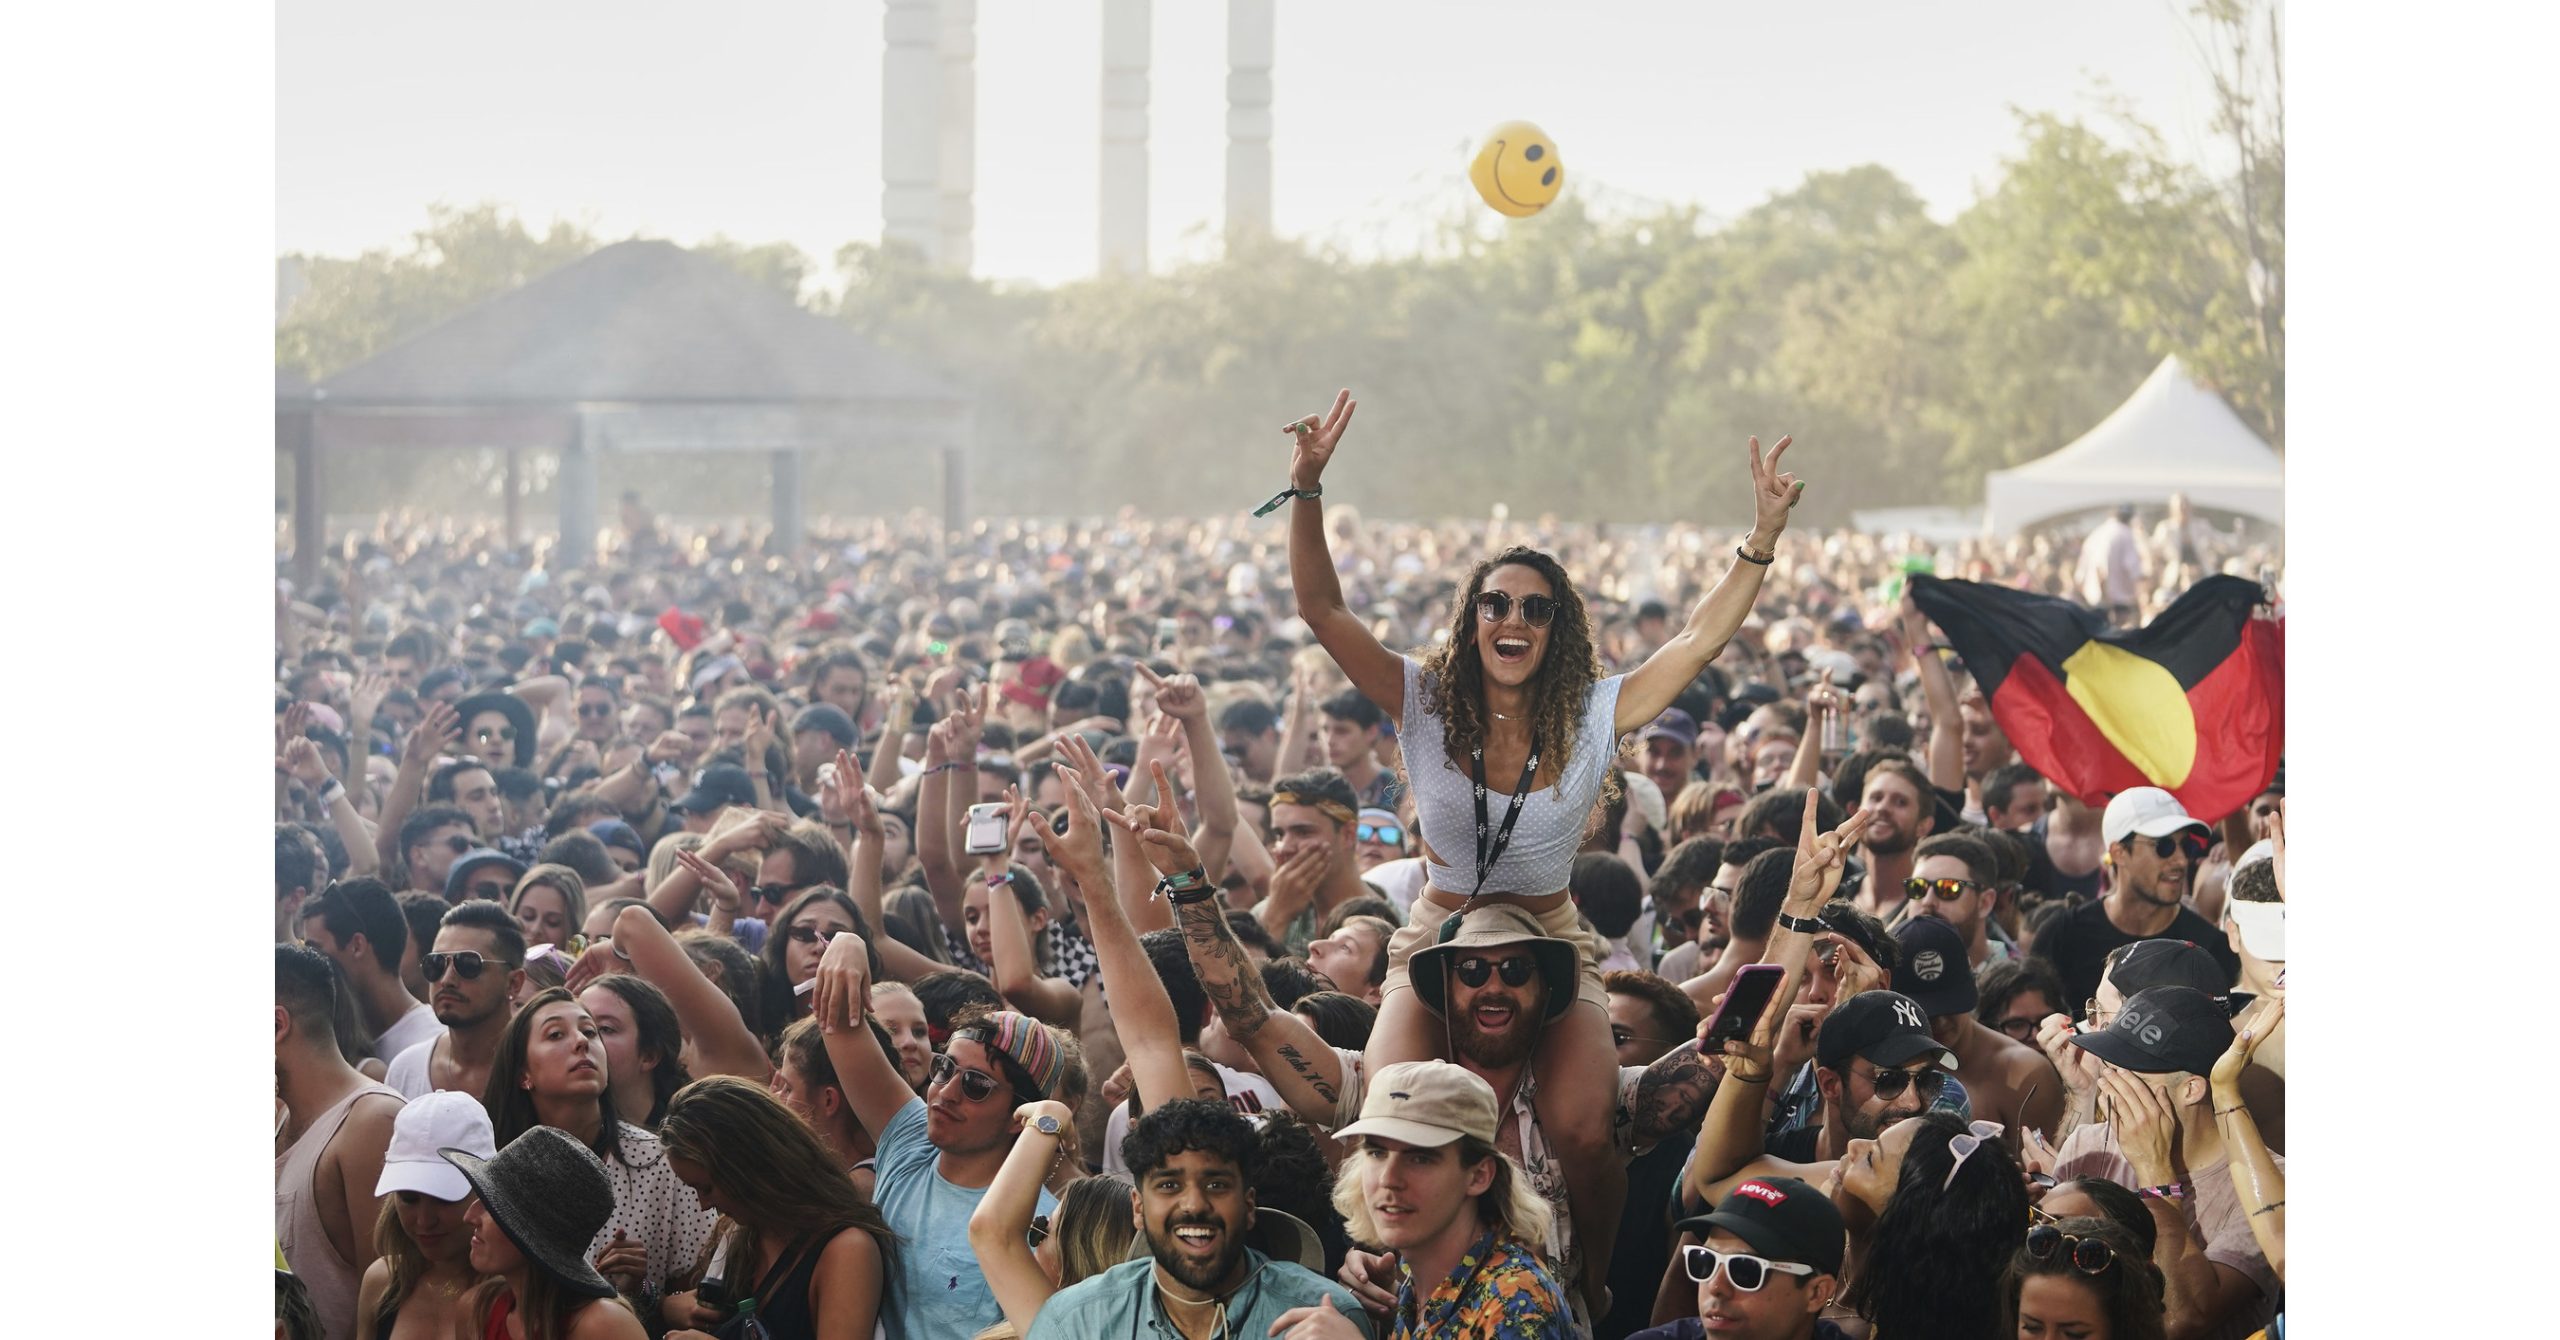 Bell presents a summer full of entertainment in Quebec as the sponsor of the OSHEAGA, îLESONIQ and LASSO Montreal festivals

